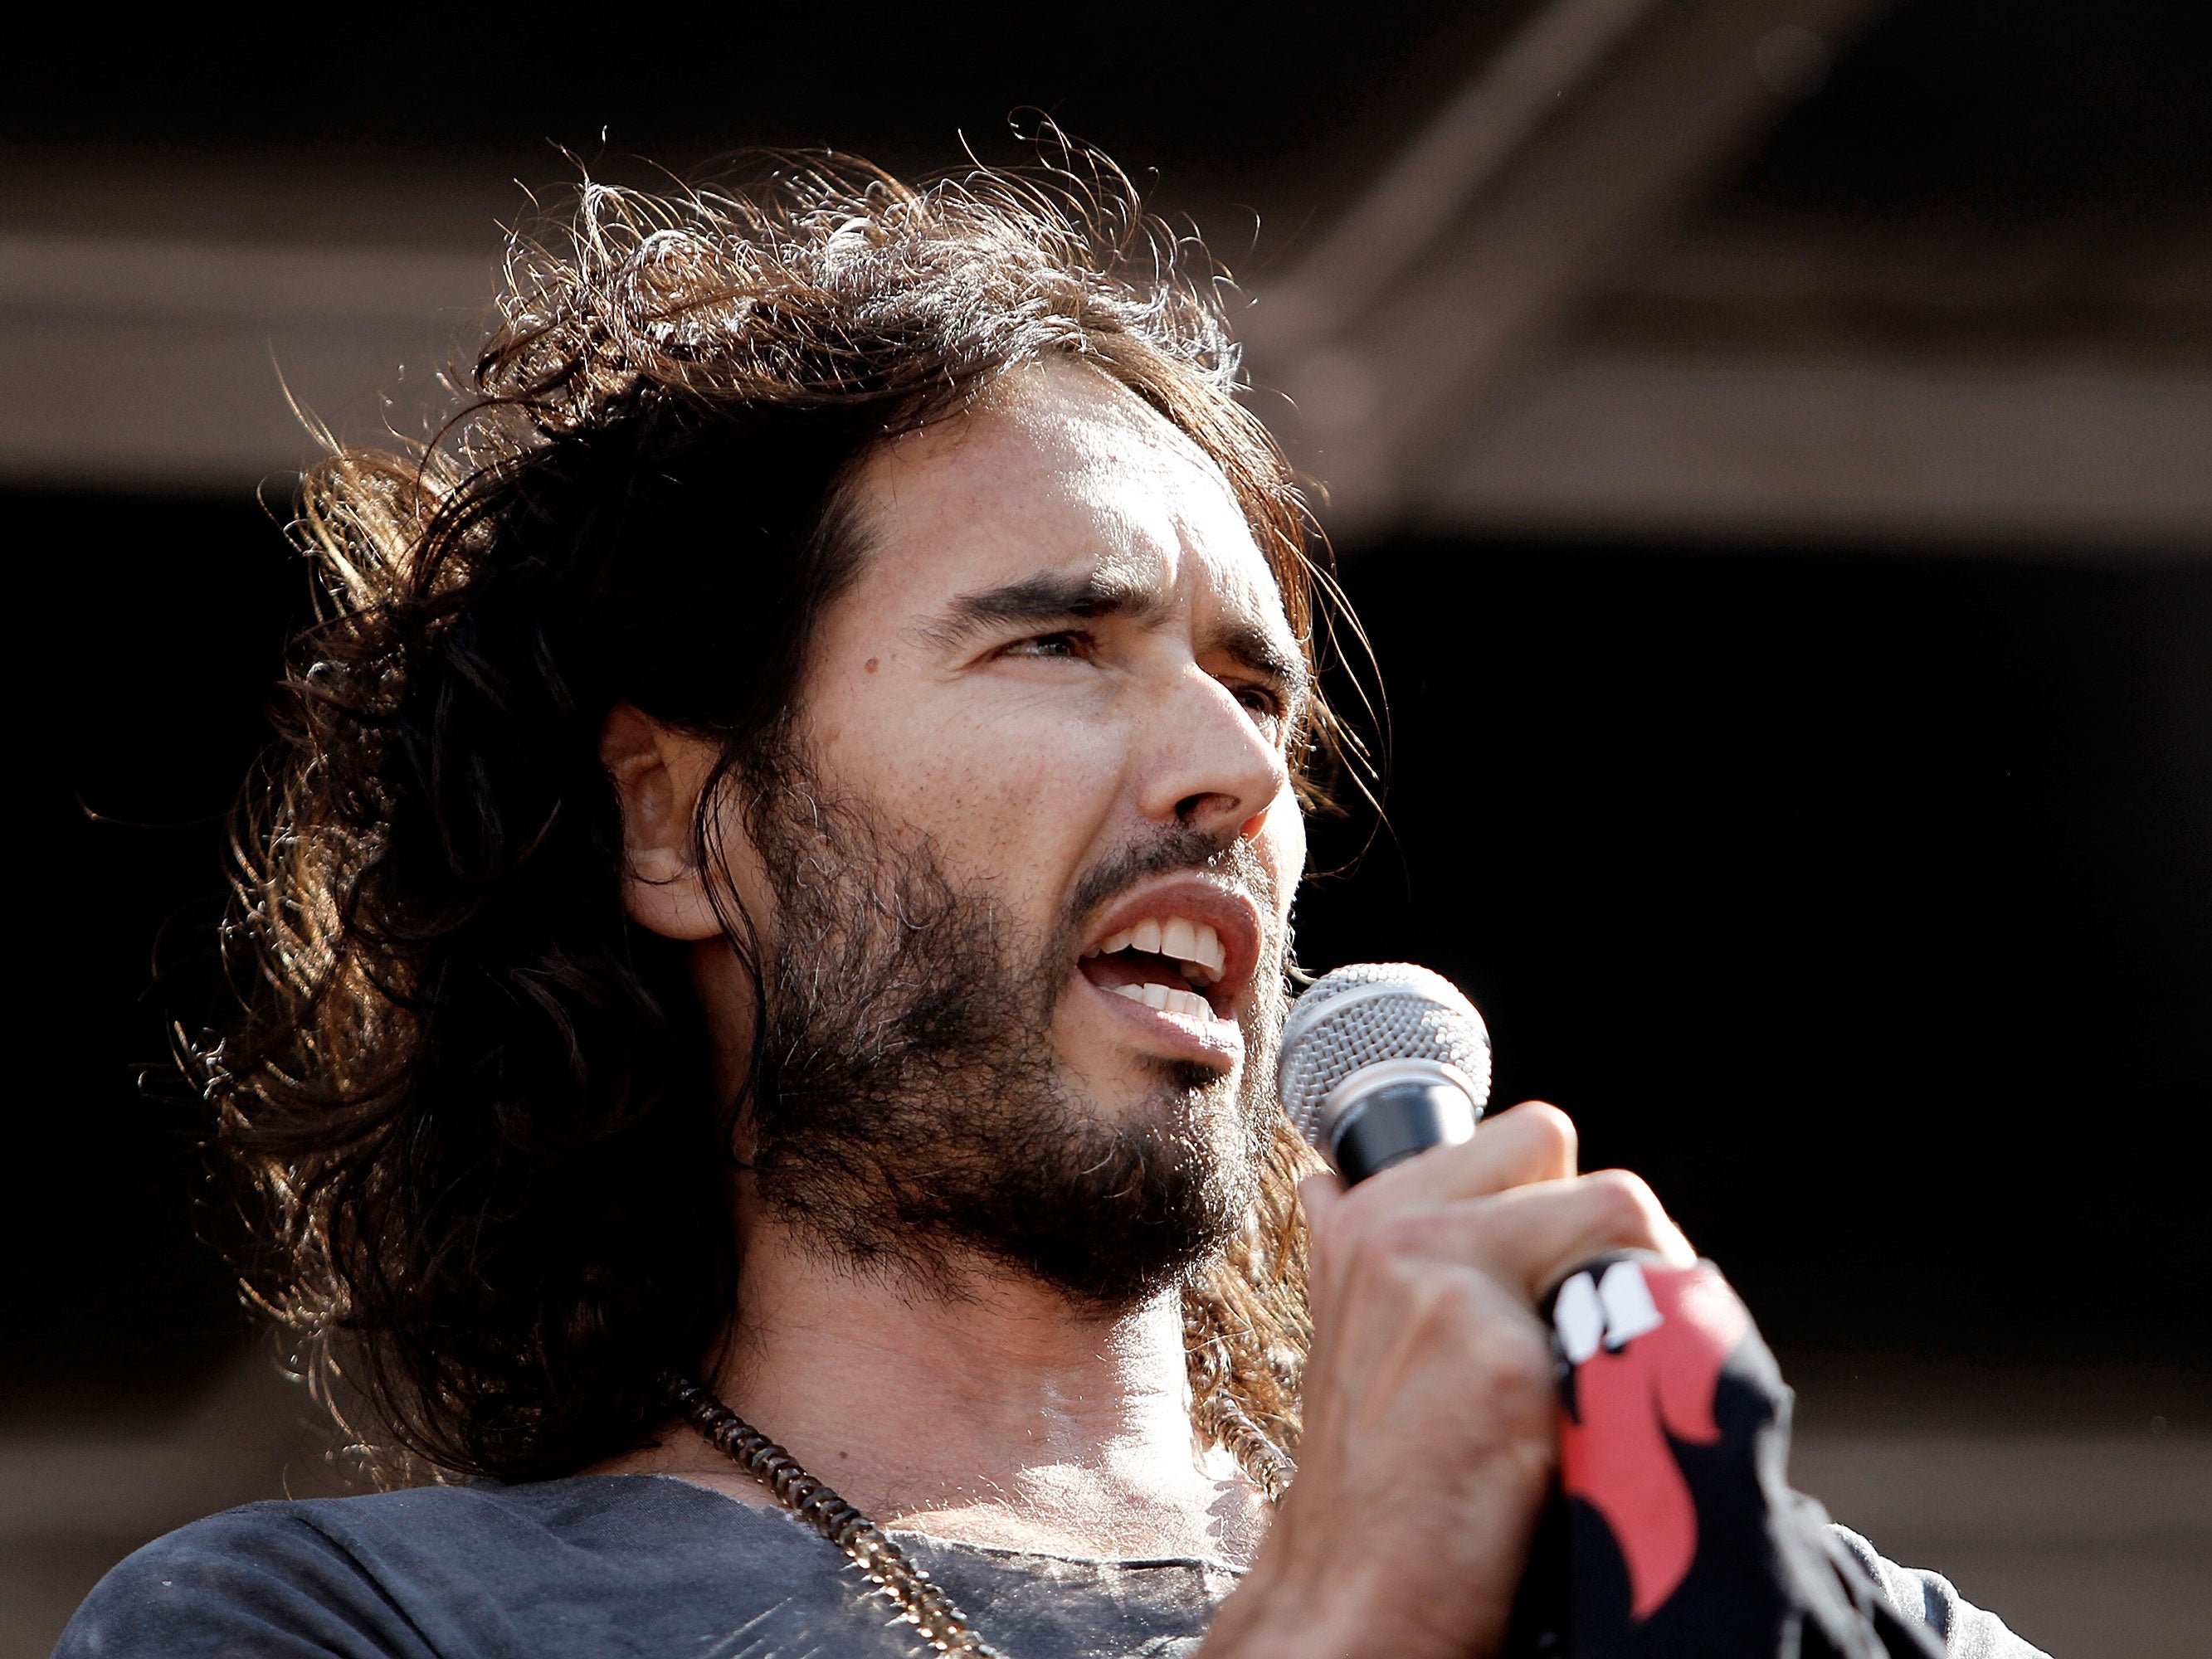 Russell Brand has responded to Jo's letter